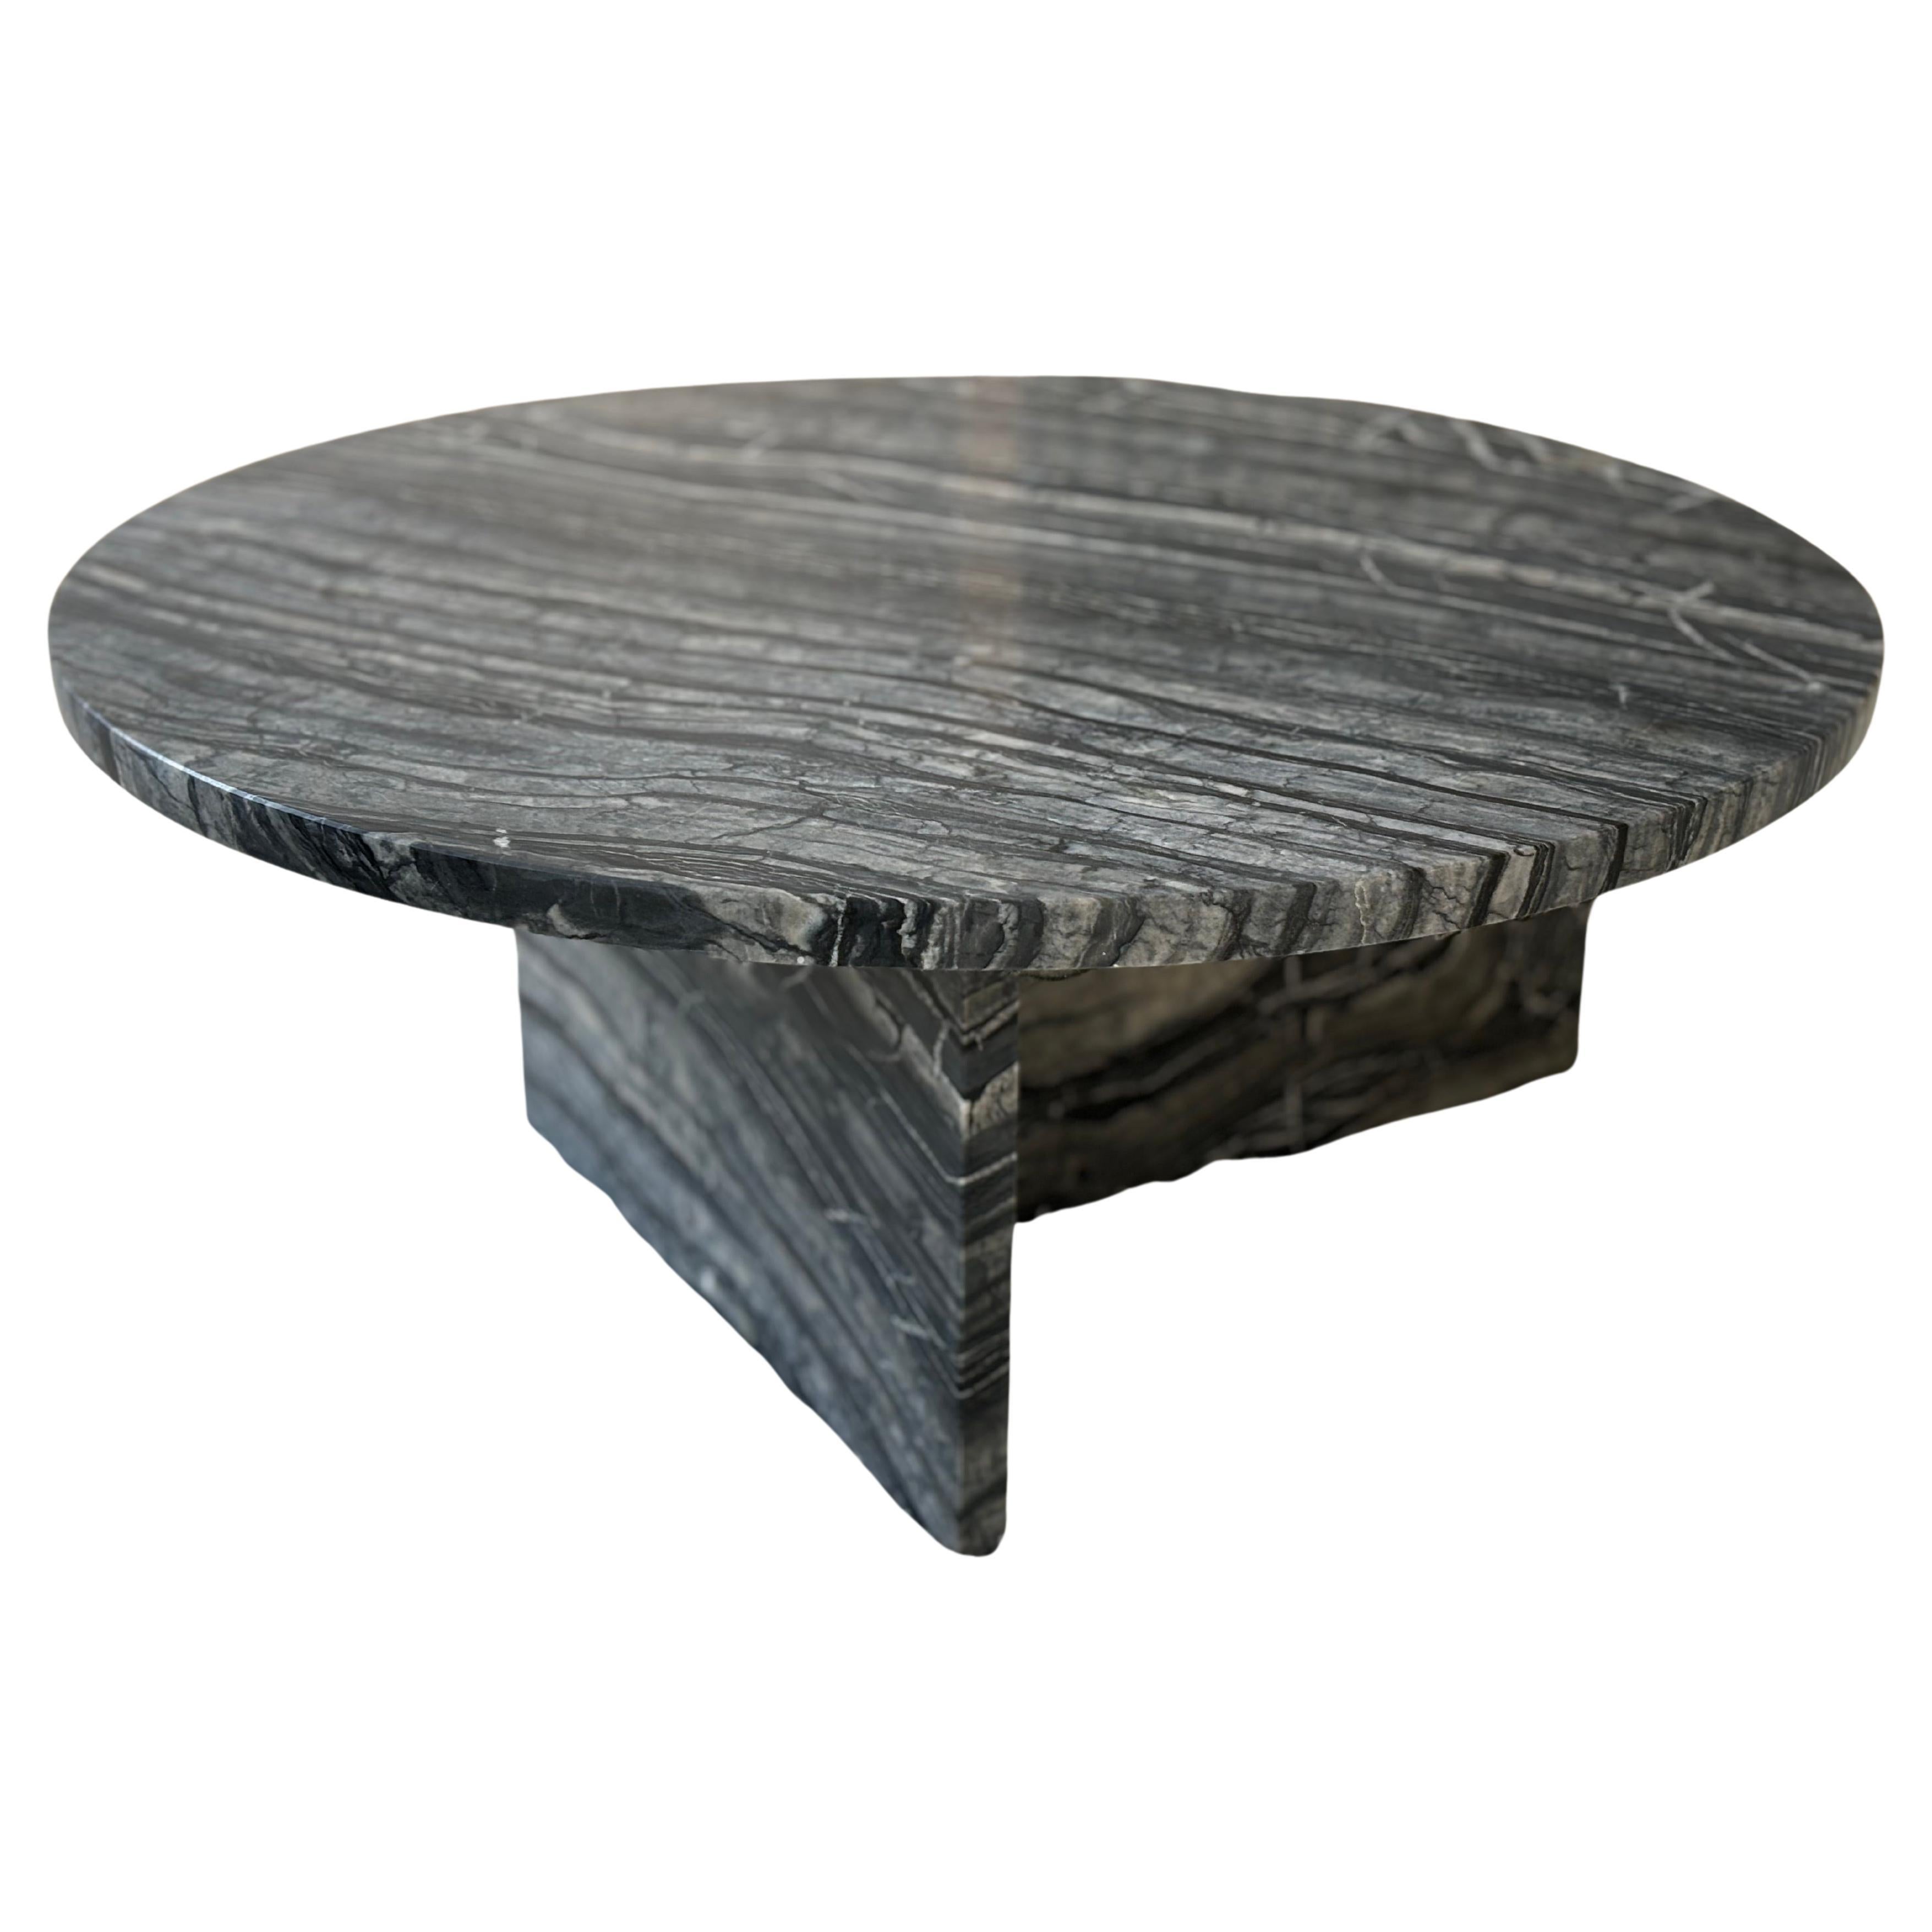 Kenya Black Marble Round Coffee Table, Made in Italy For Sale